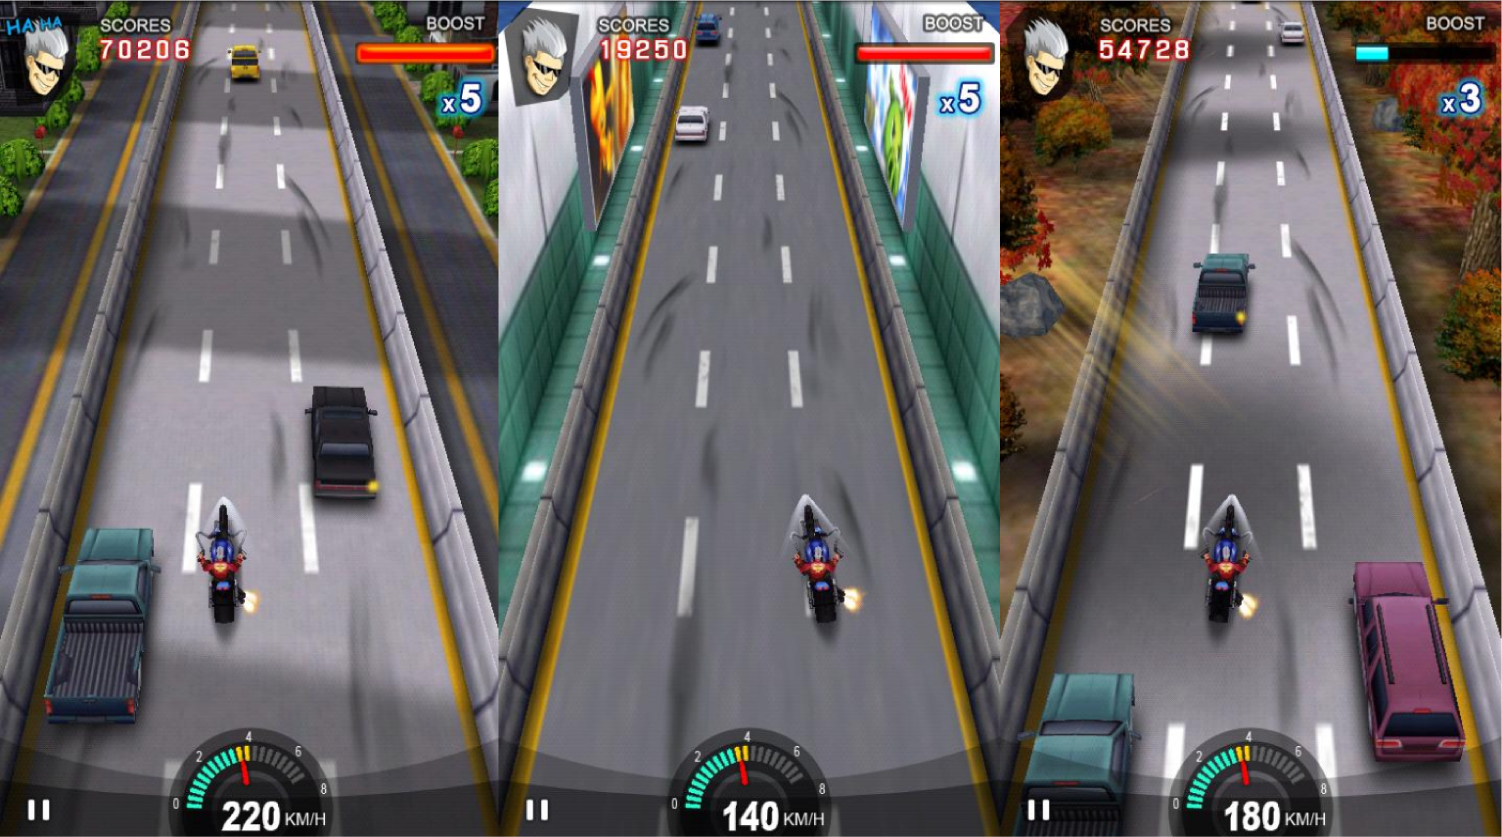 best bike games for android